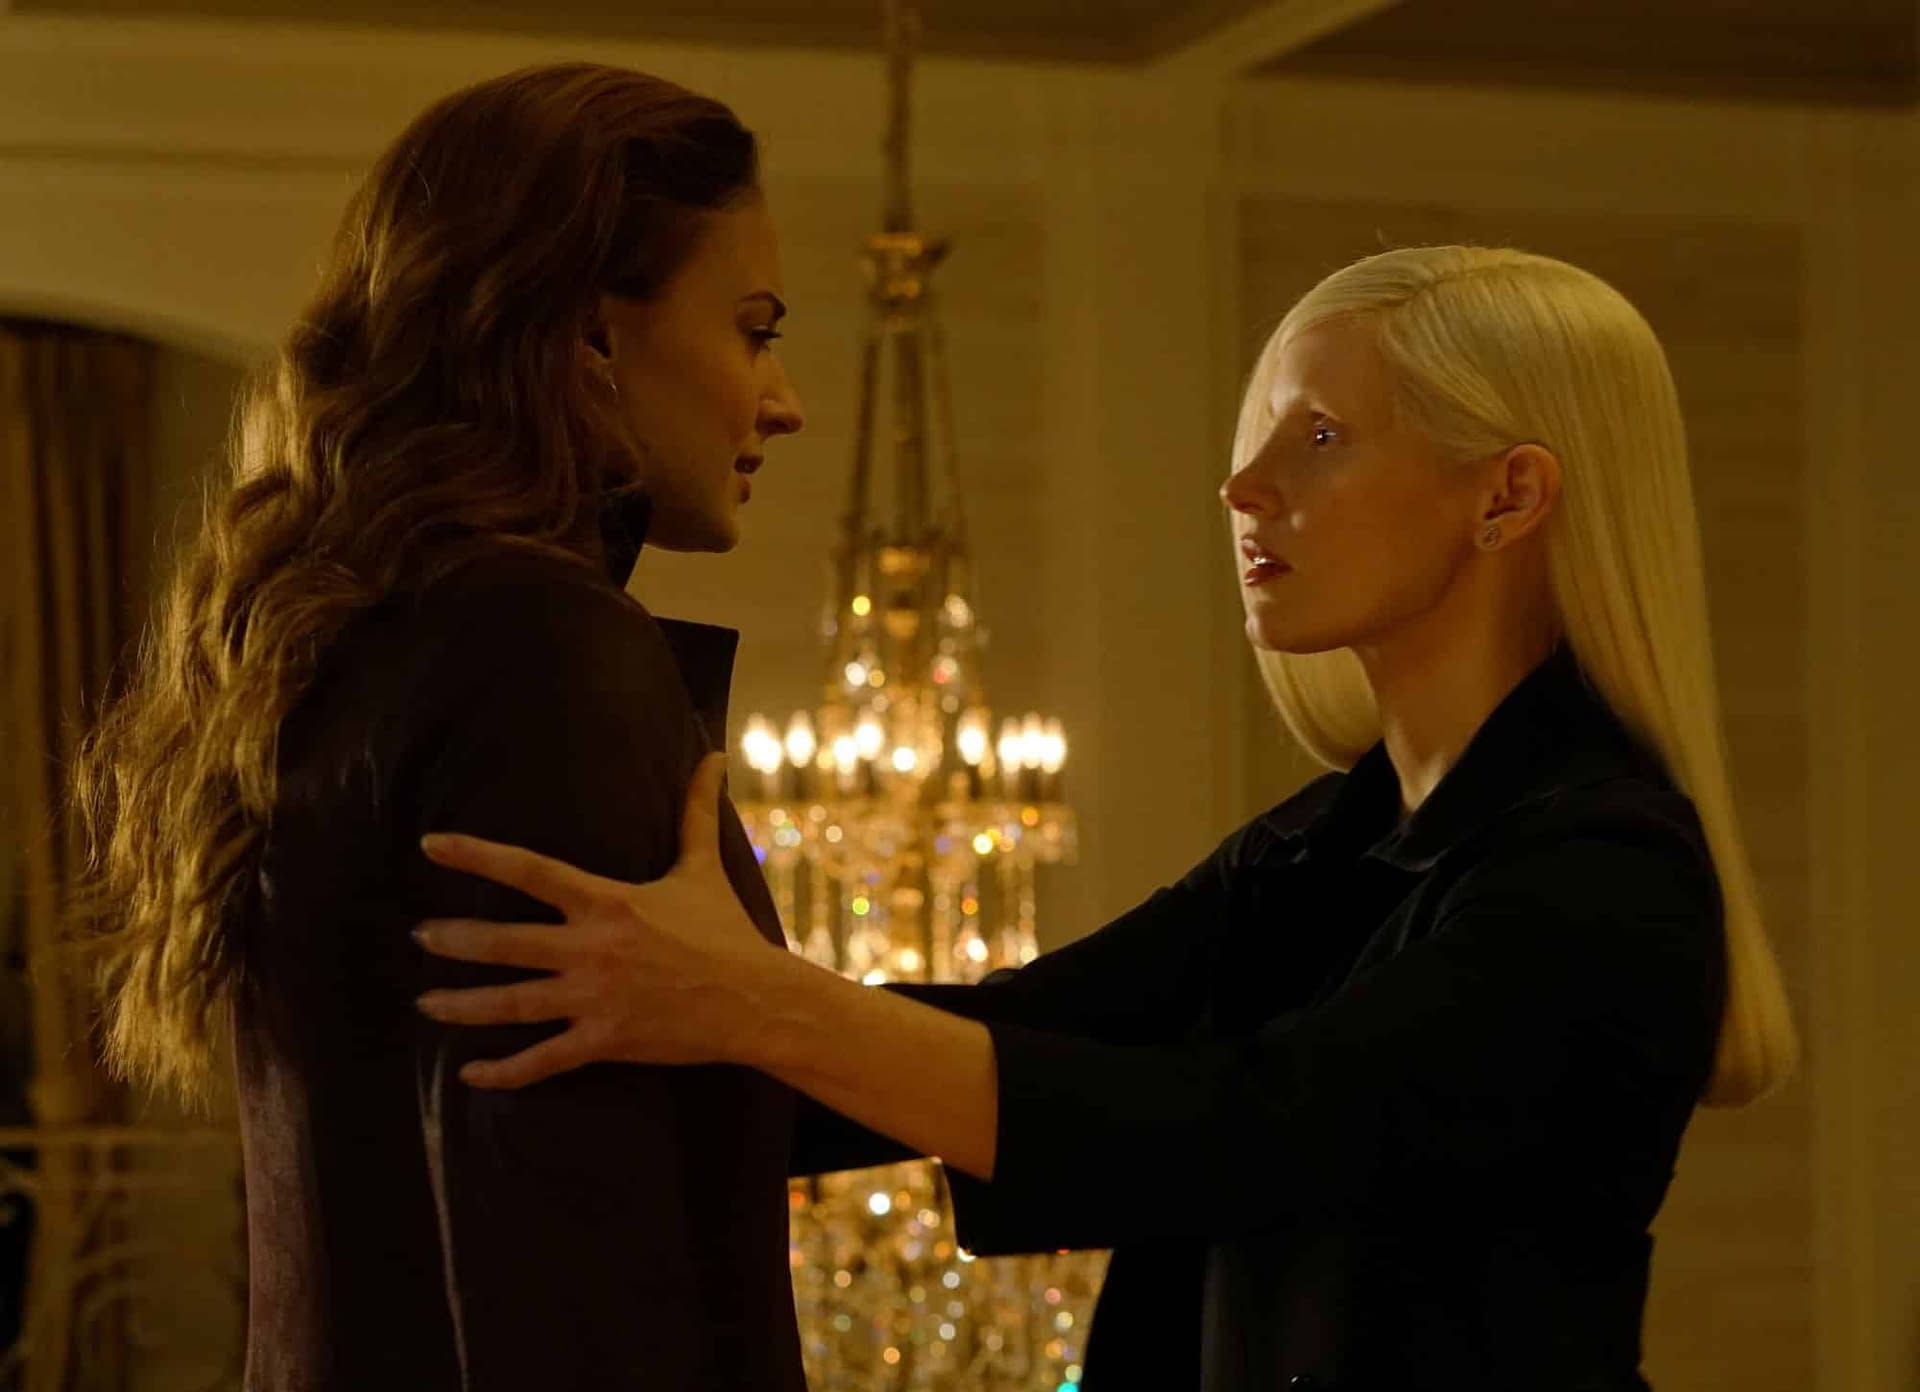 2 New Images from Dark Phoenix Show Off New Characters